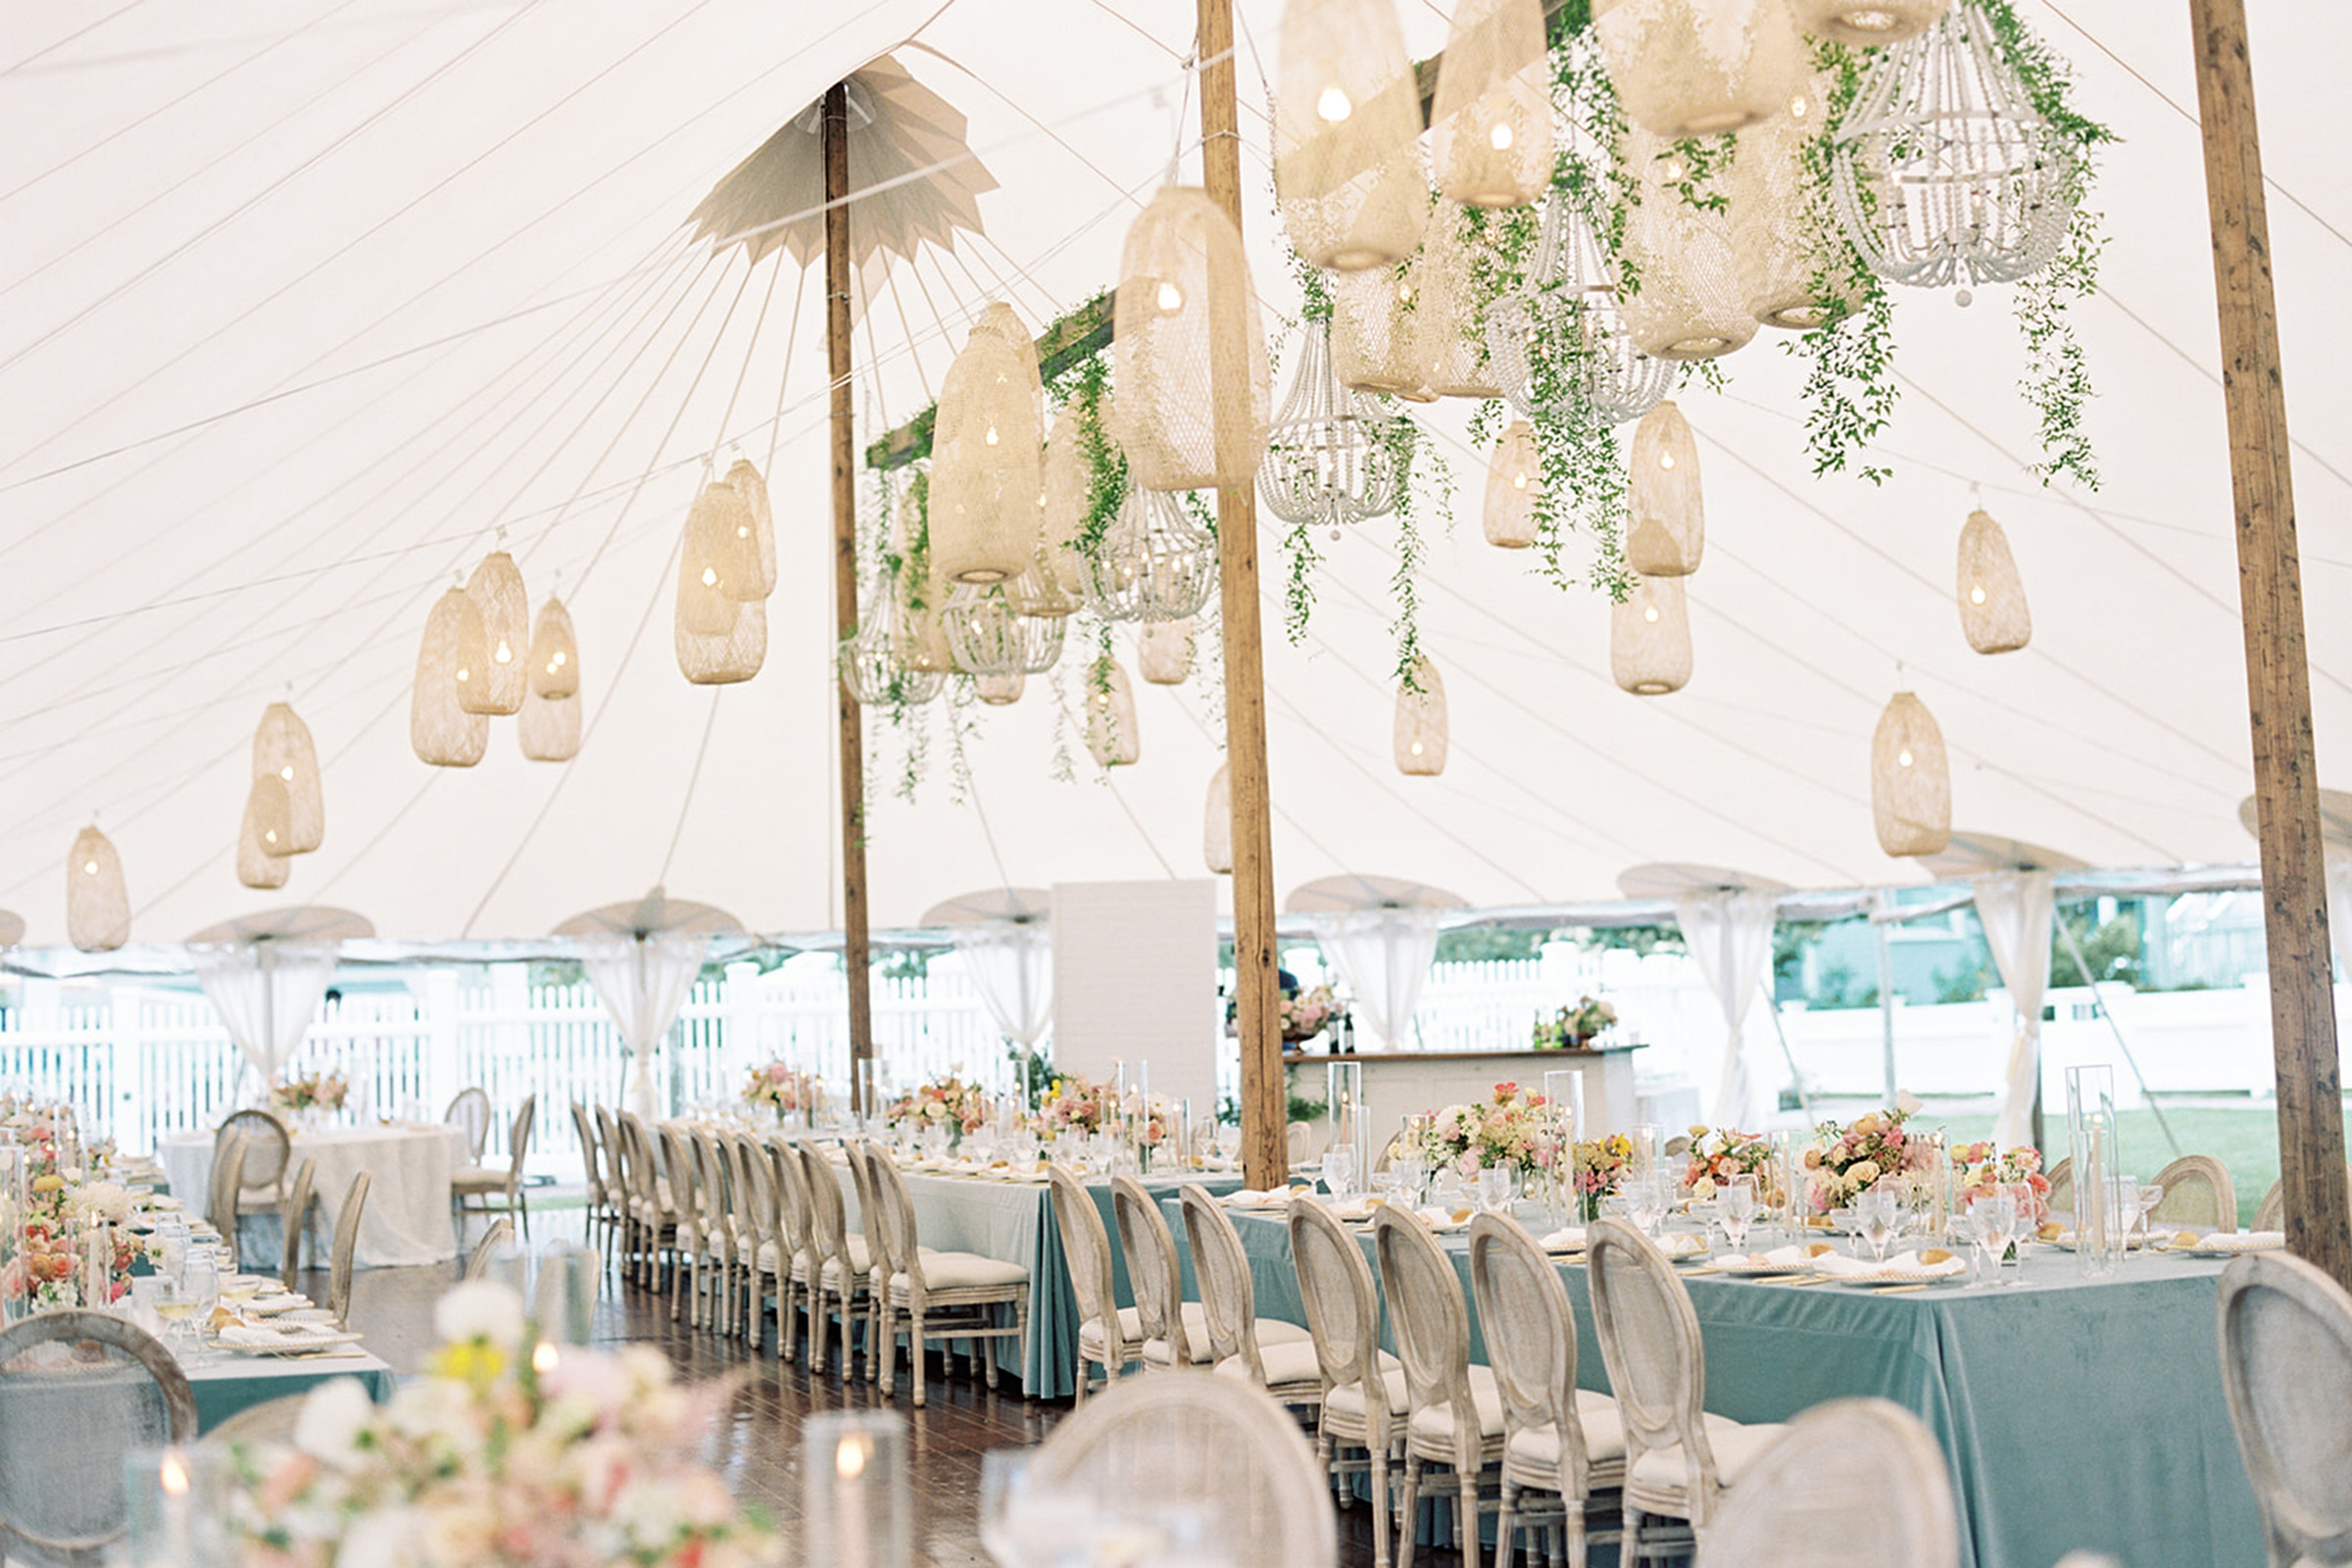 A wedding tent with lighting handing and tables with a blue table cloth and flowers in center.